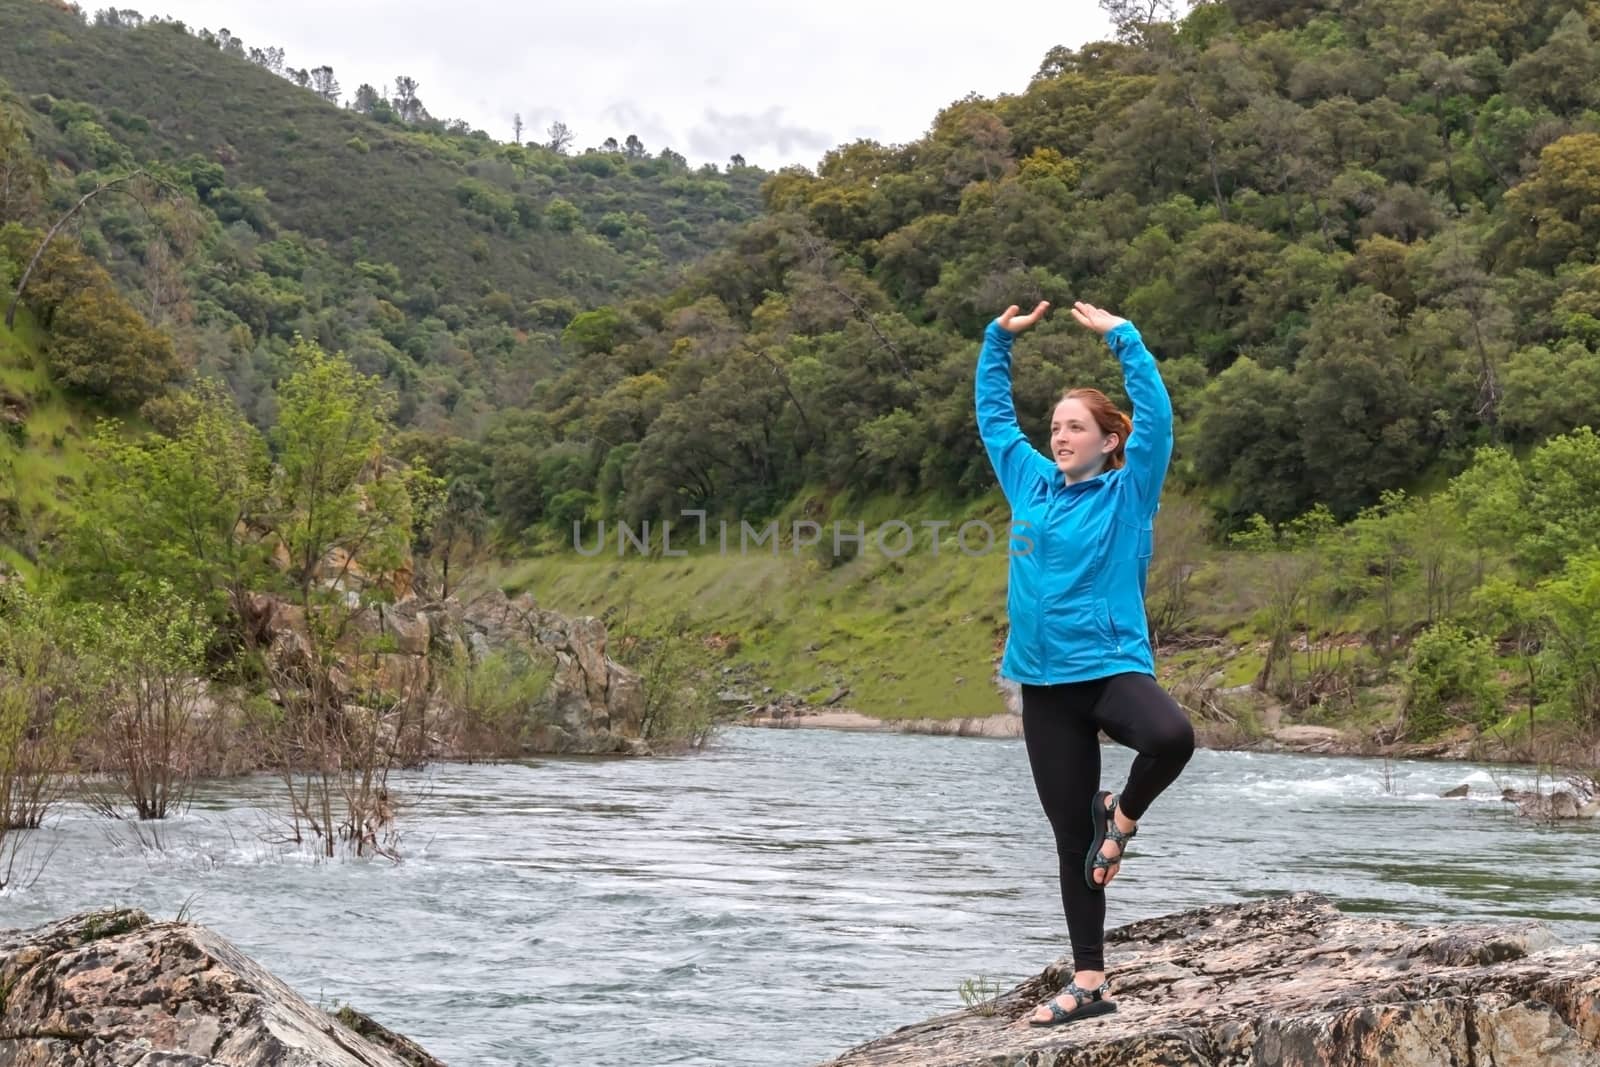 Young Girl Stretching on Rocks Near Fast River